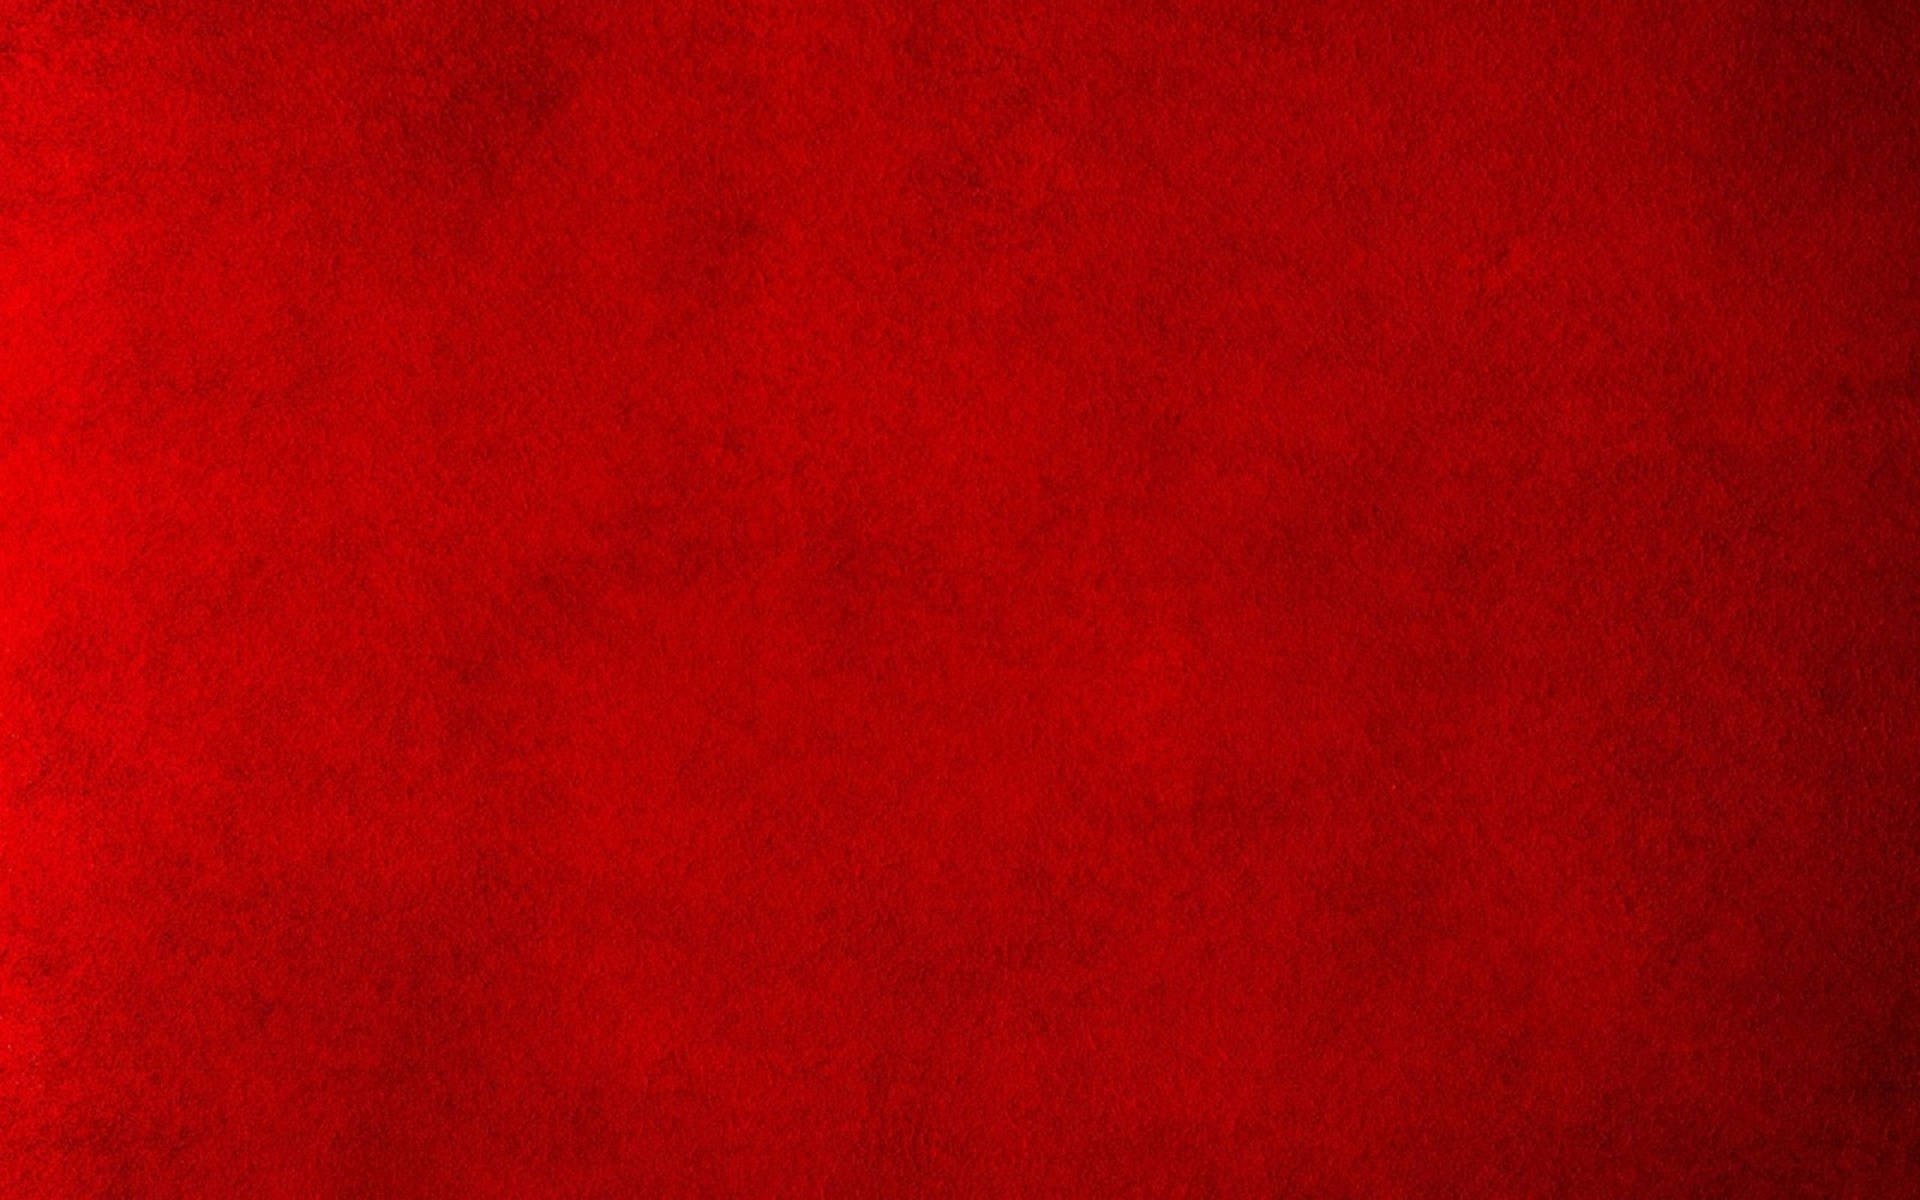 A Vibrant Red Background Wallpaper